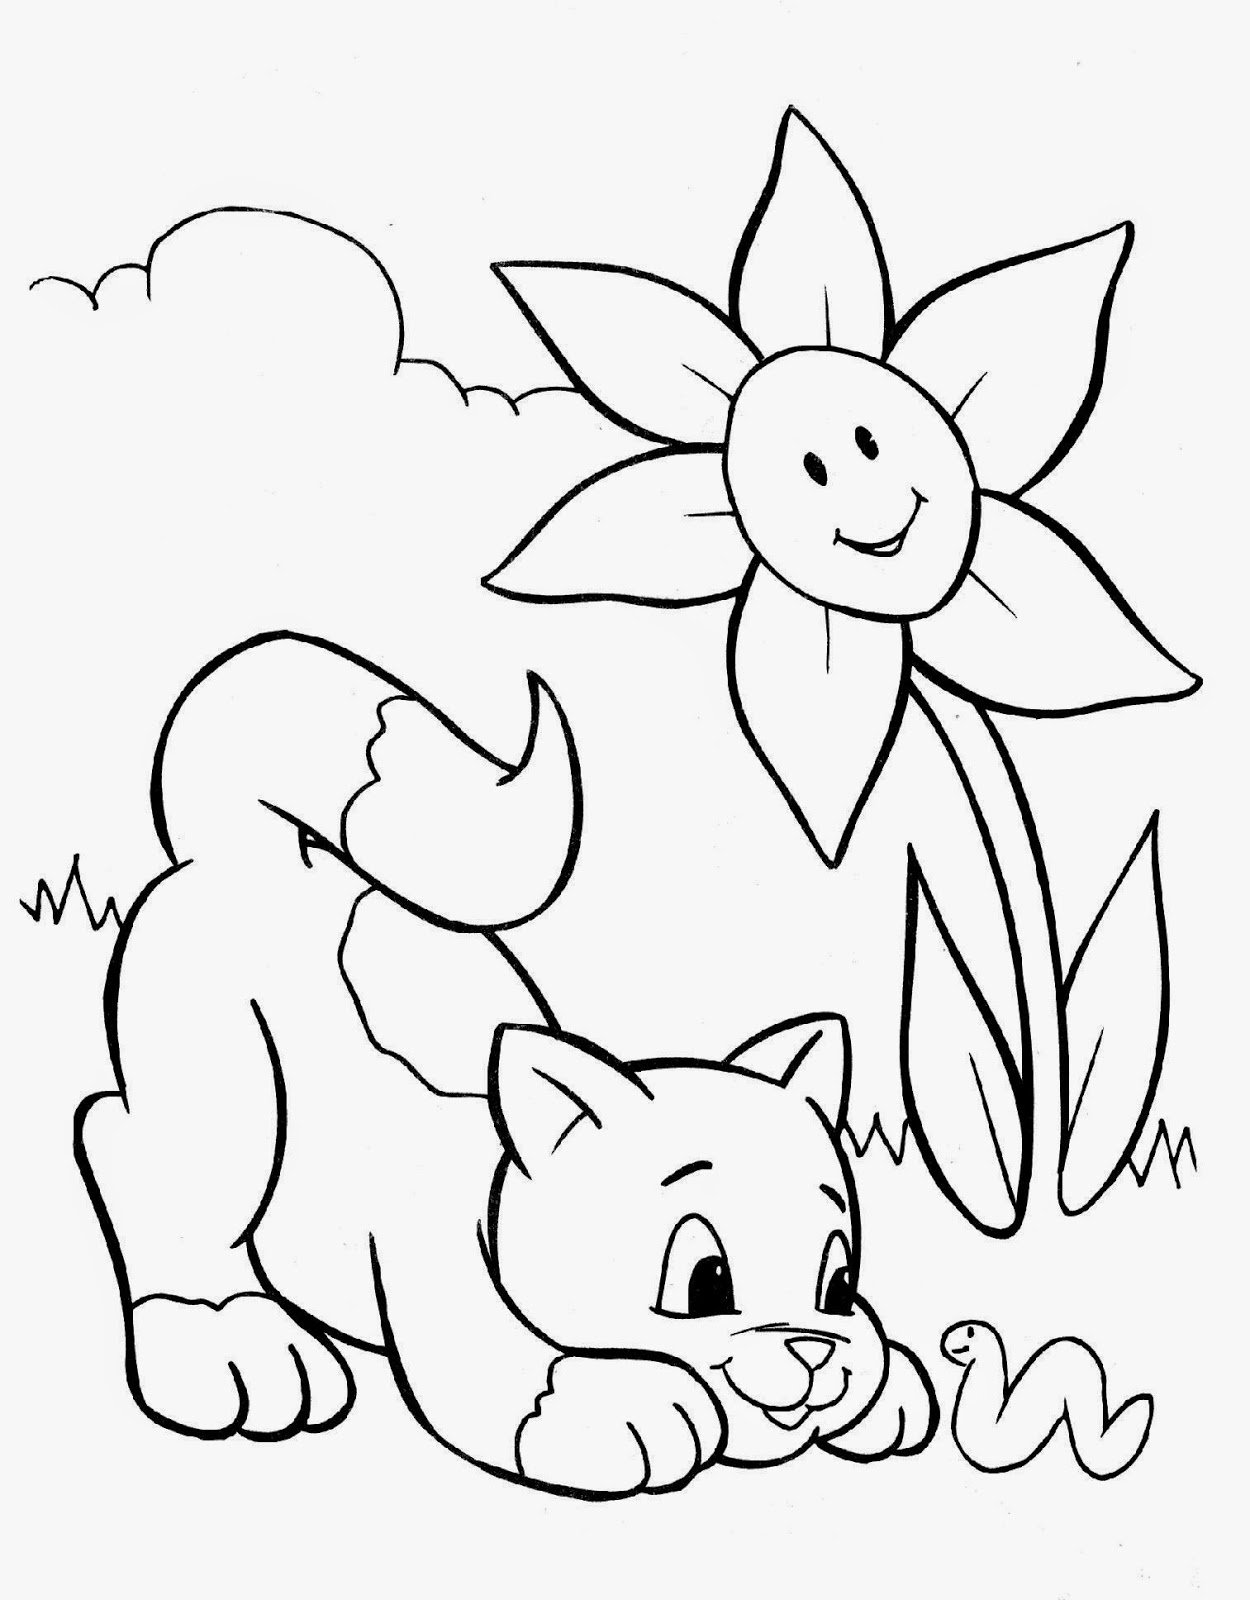 Crayola Coloring Pages  Free Coloring Sheet